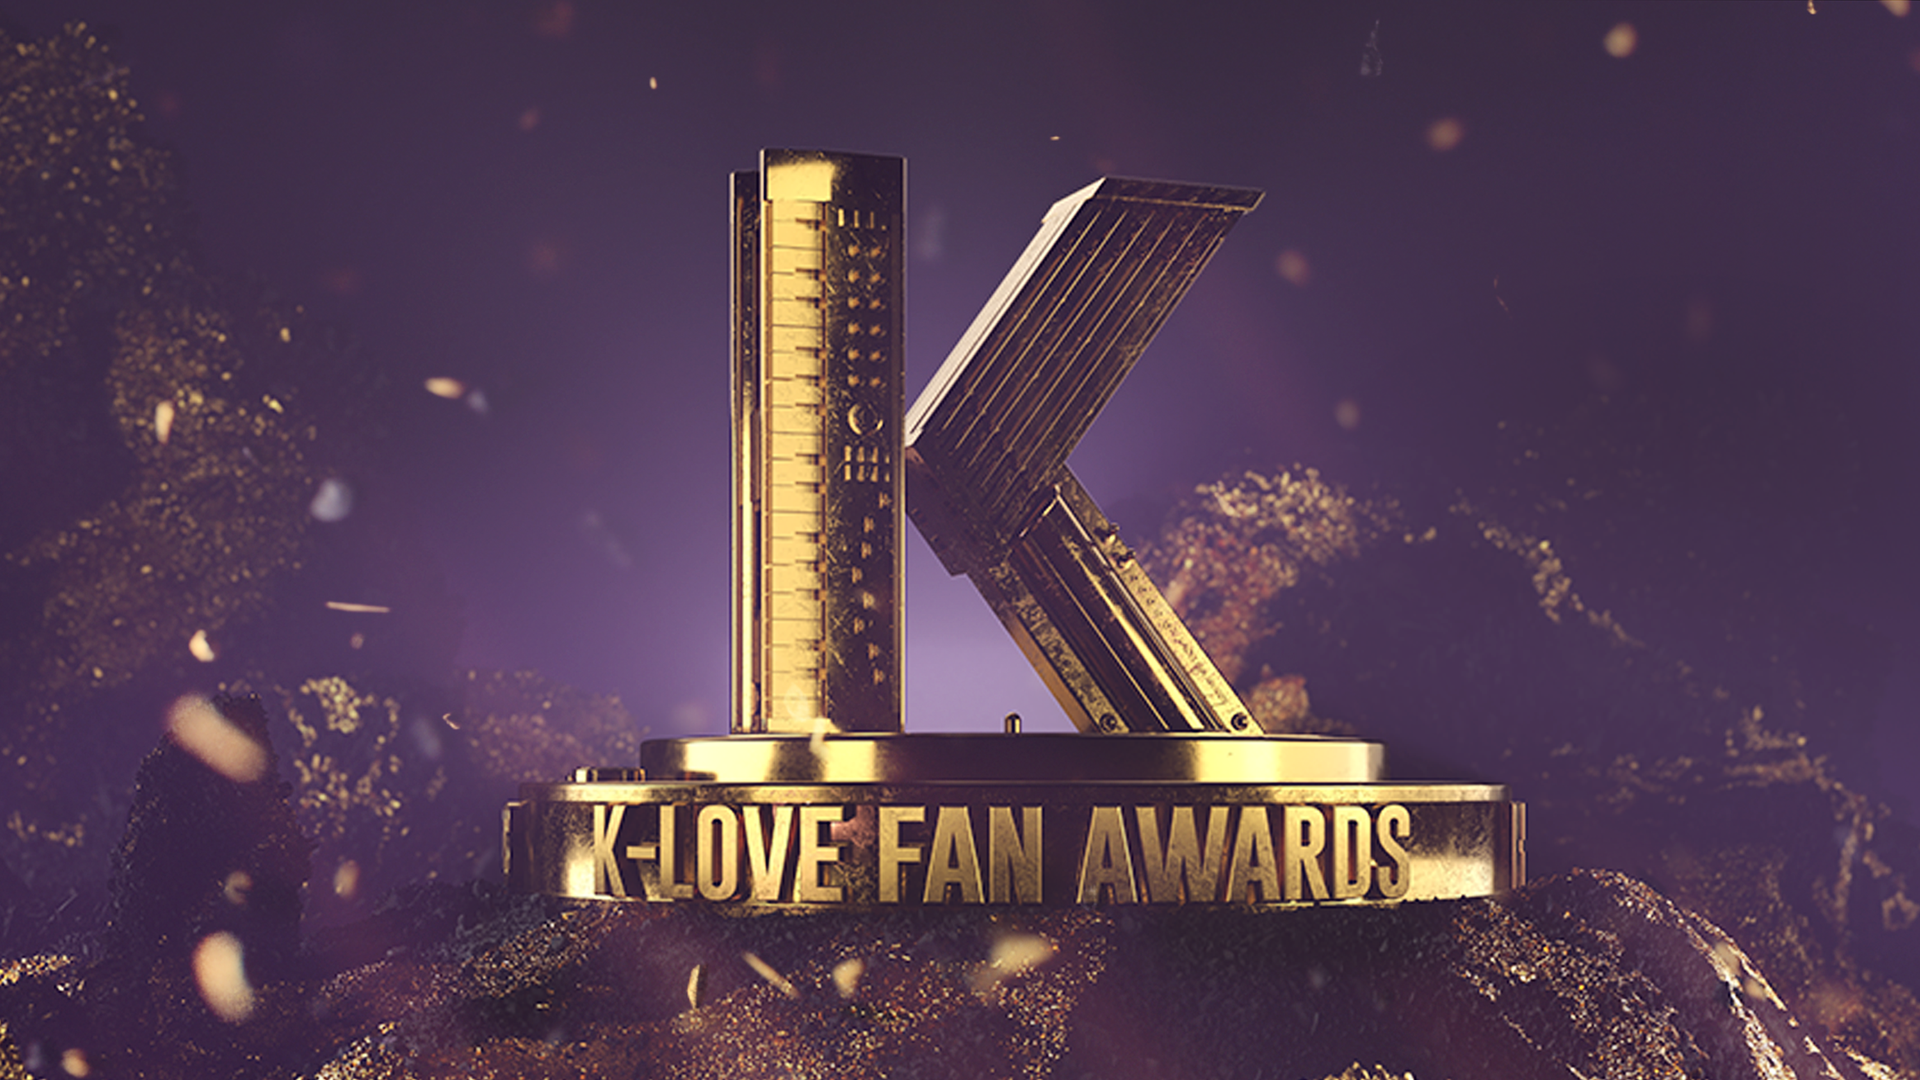 2022 K-LOVE Fan Awards to Honor Some of Christian Music’s Top Artists and Songs